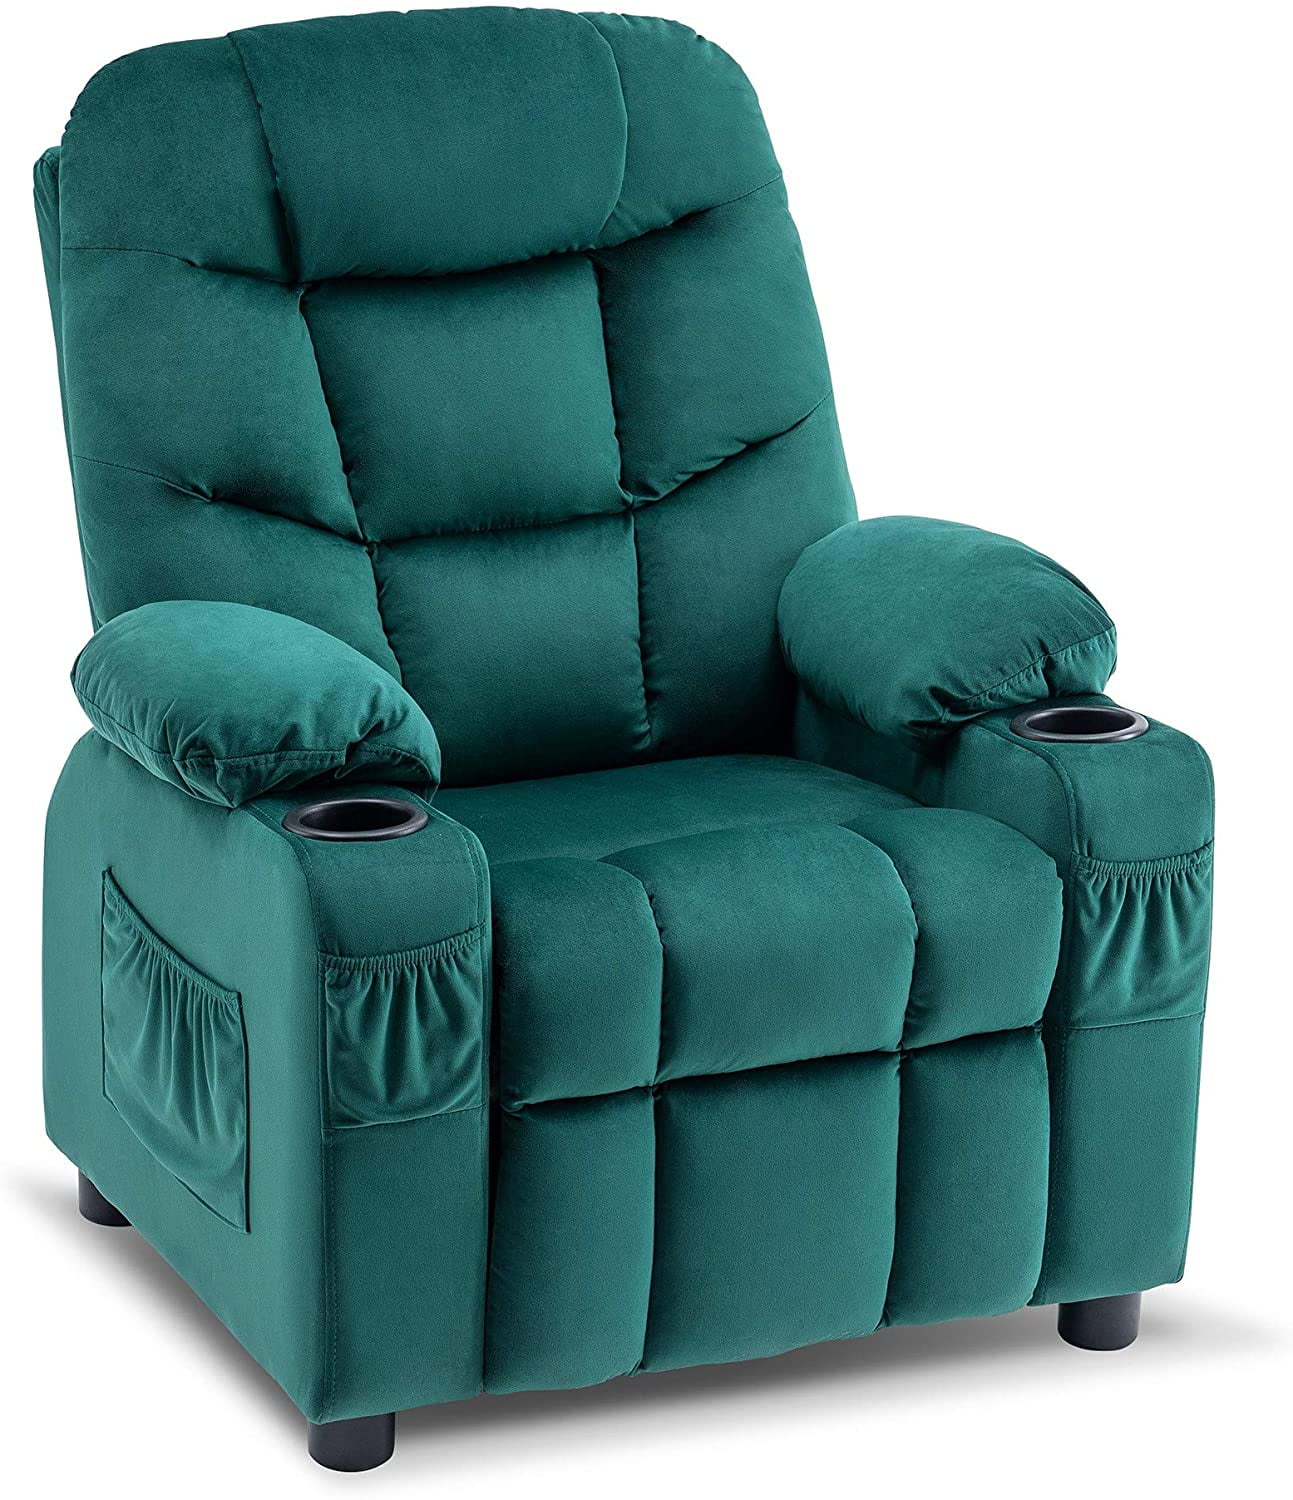 Big Kids Recliner Chair with Cup Holders for Boys